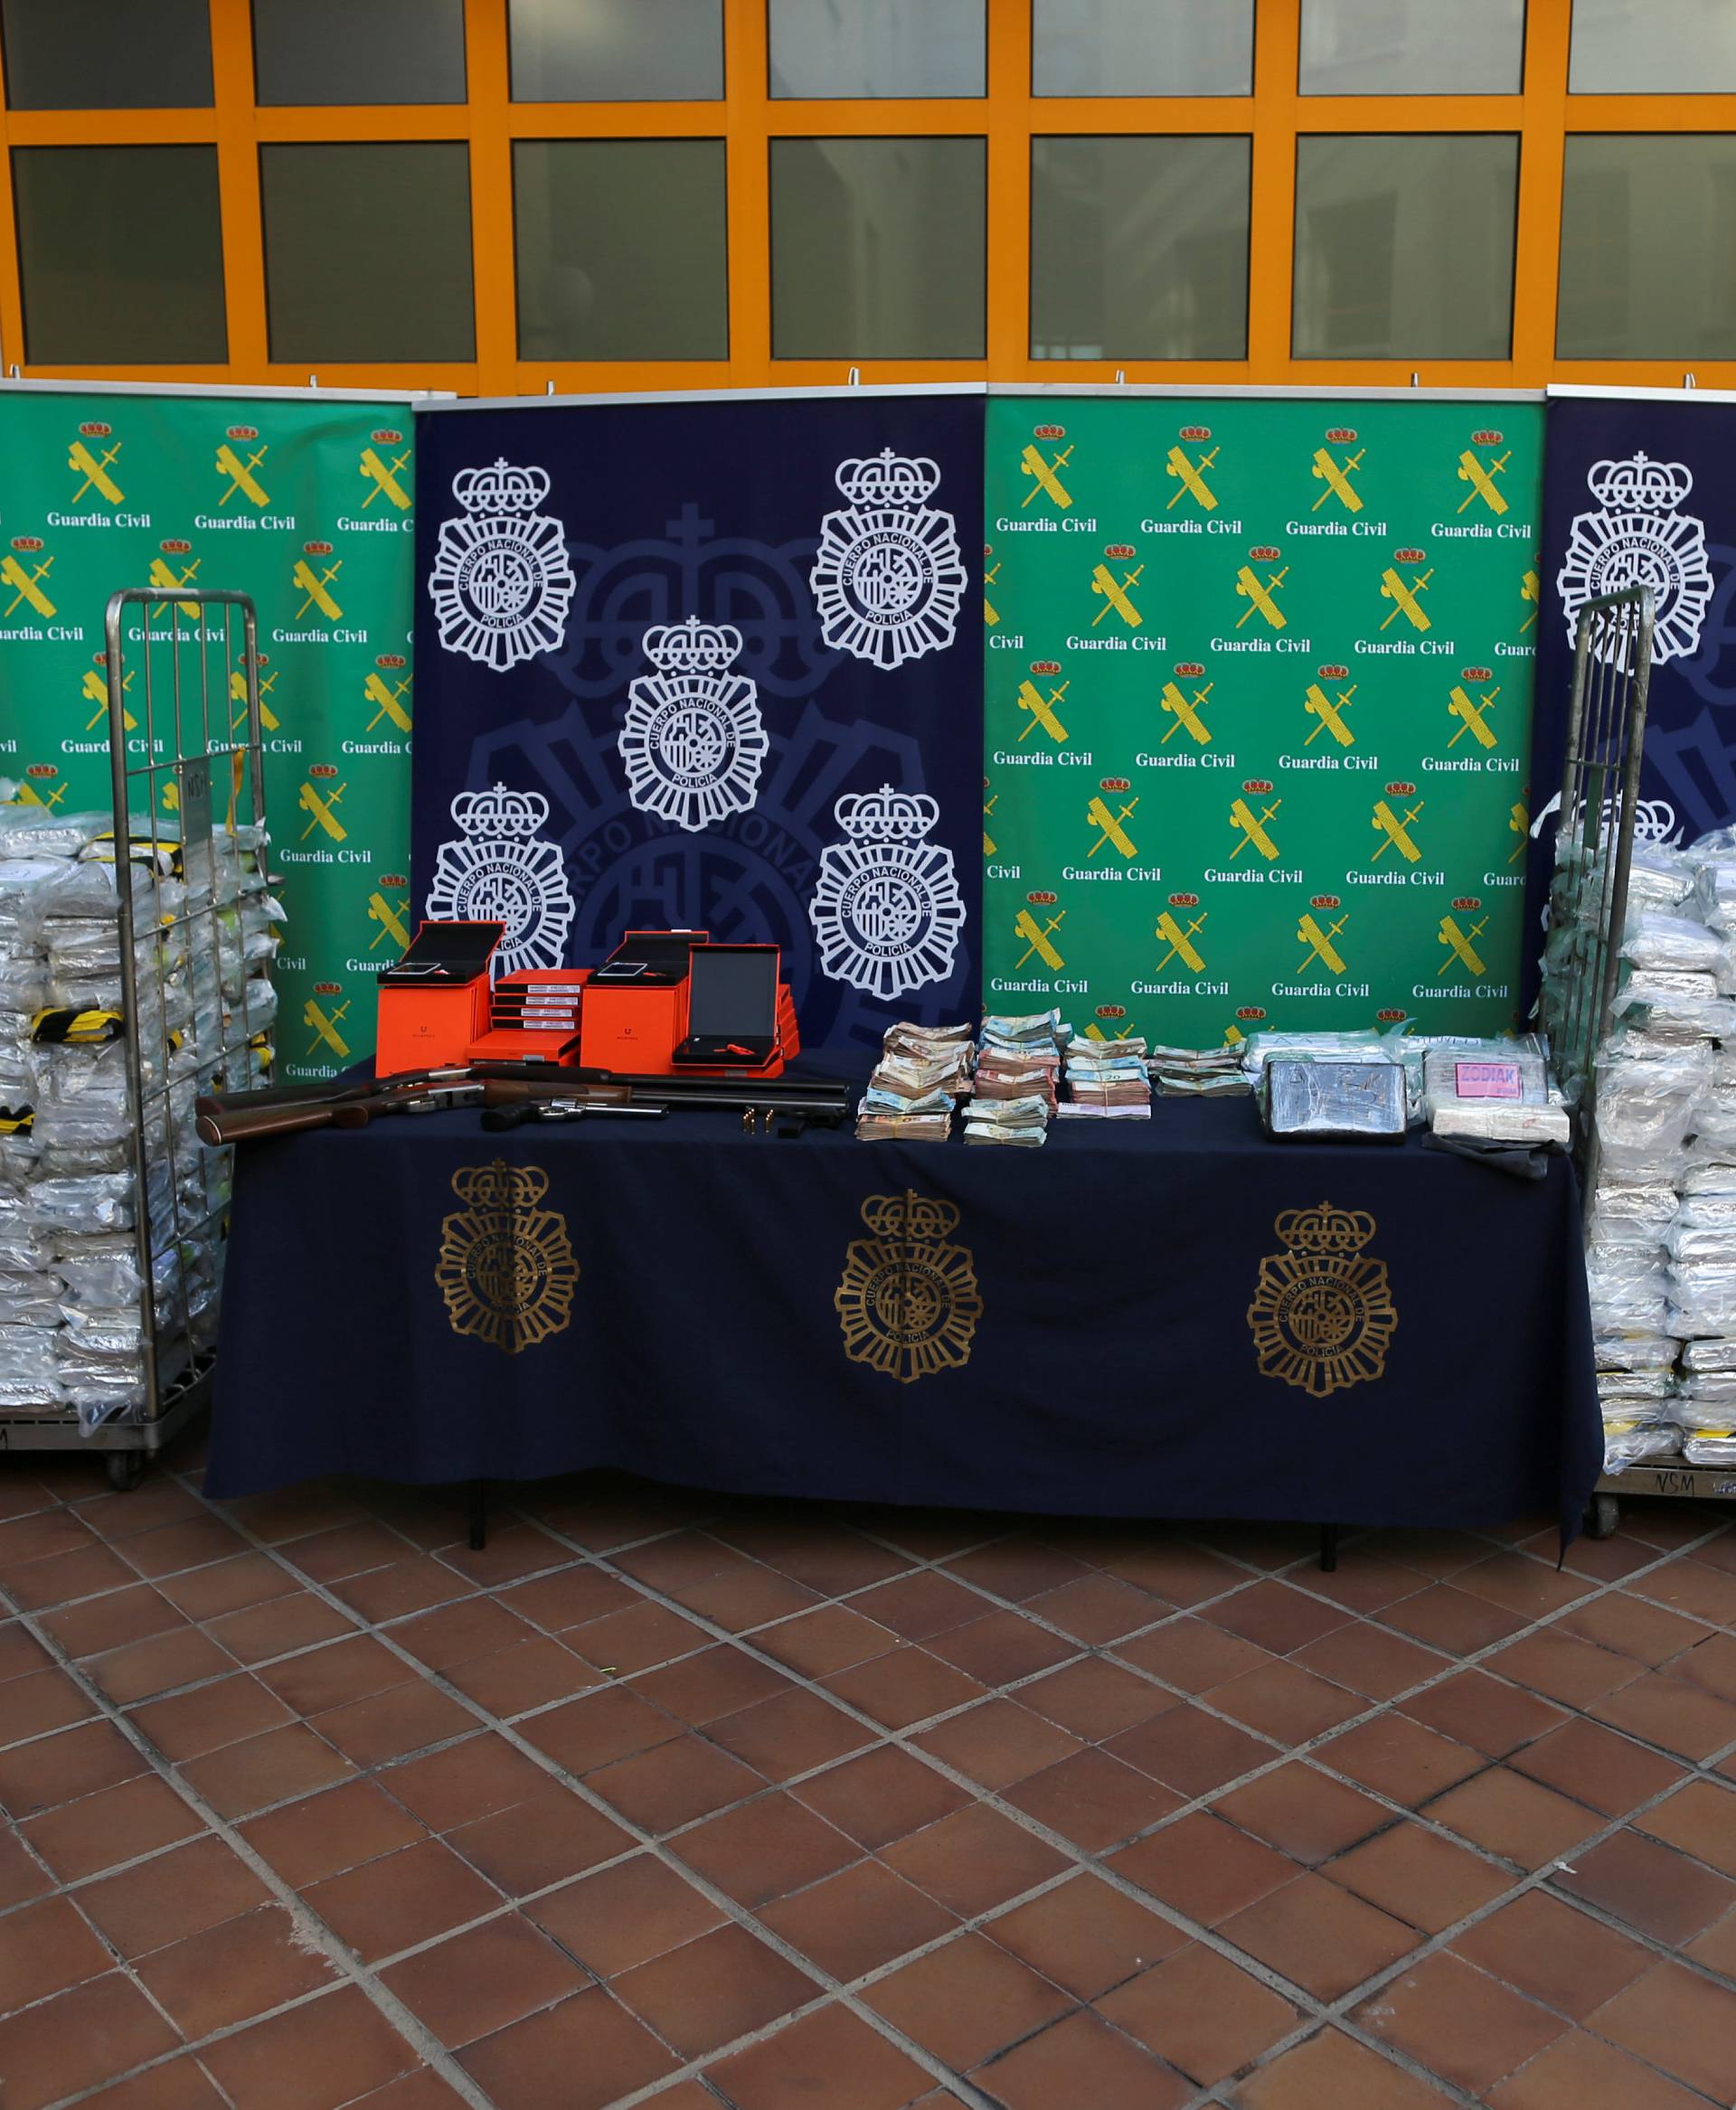 Police display a portion of the six tonnes of cocaine, money and other material seized at an industrial estate at the police headquarters in Malaga